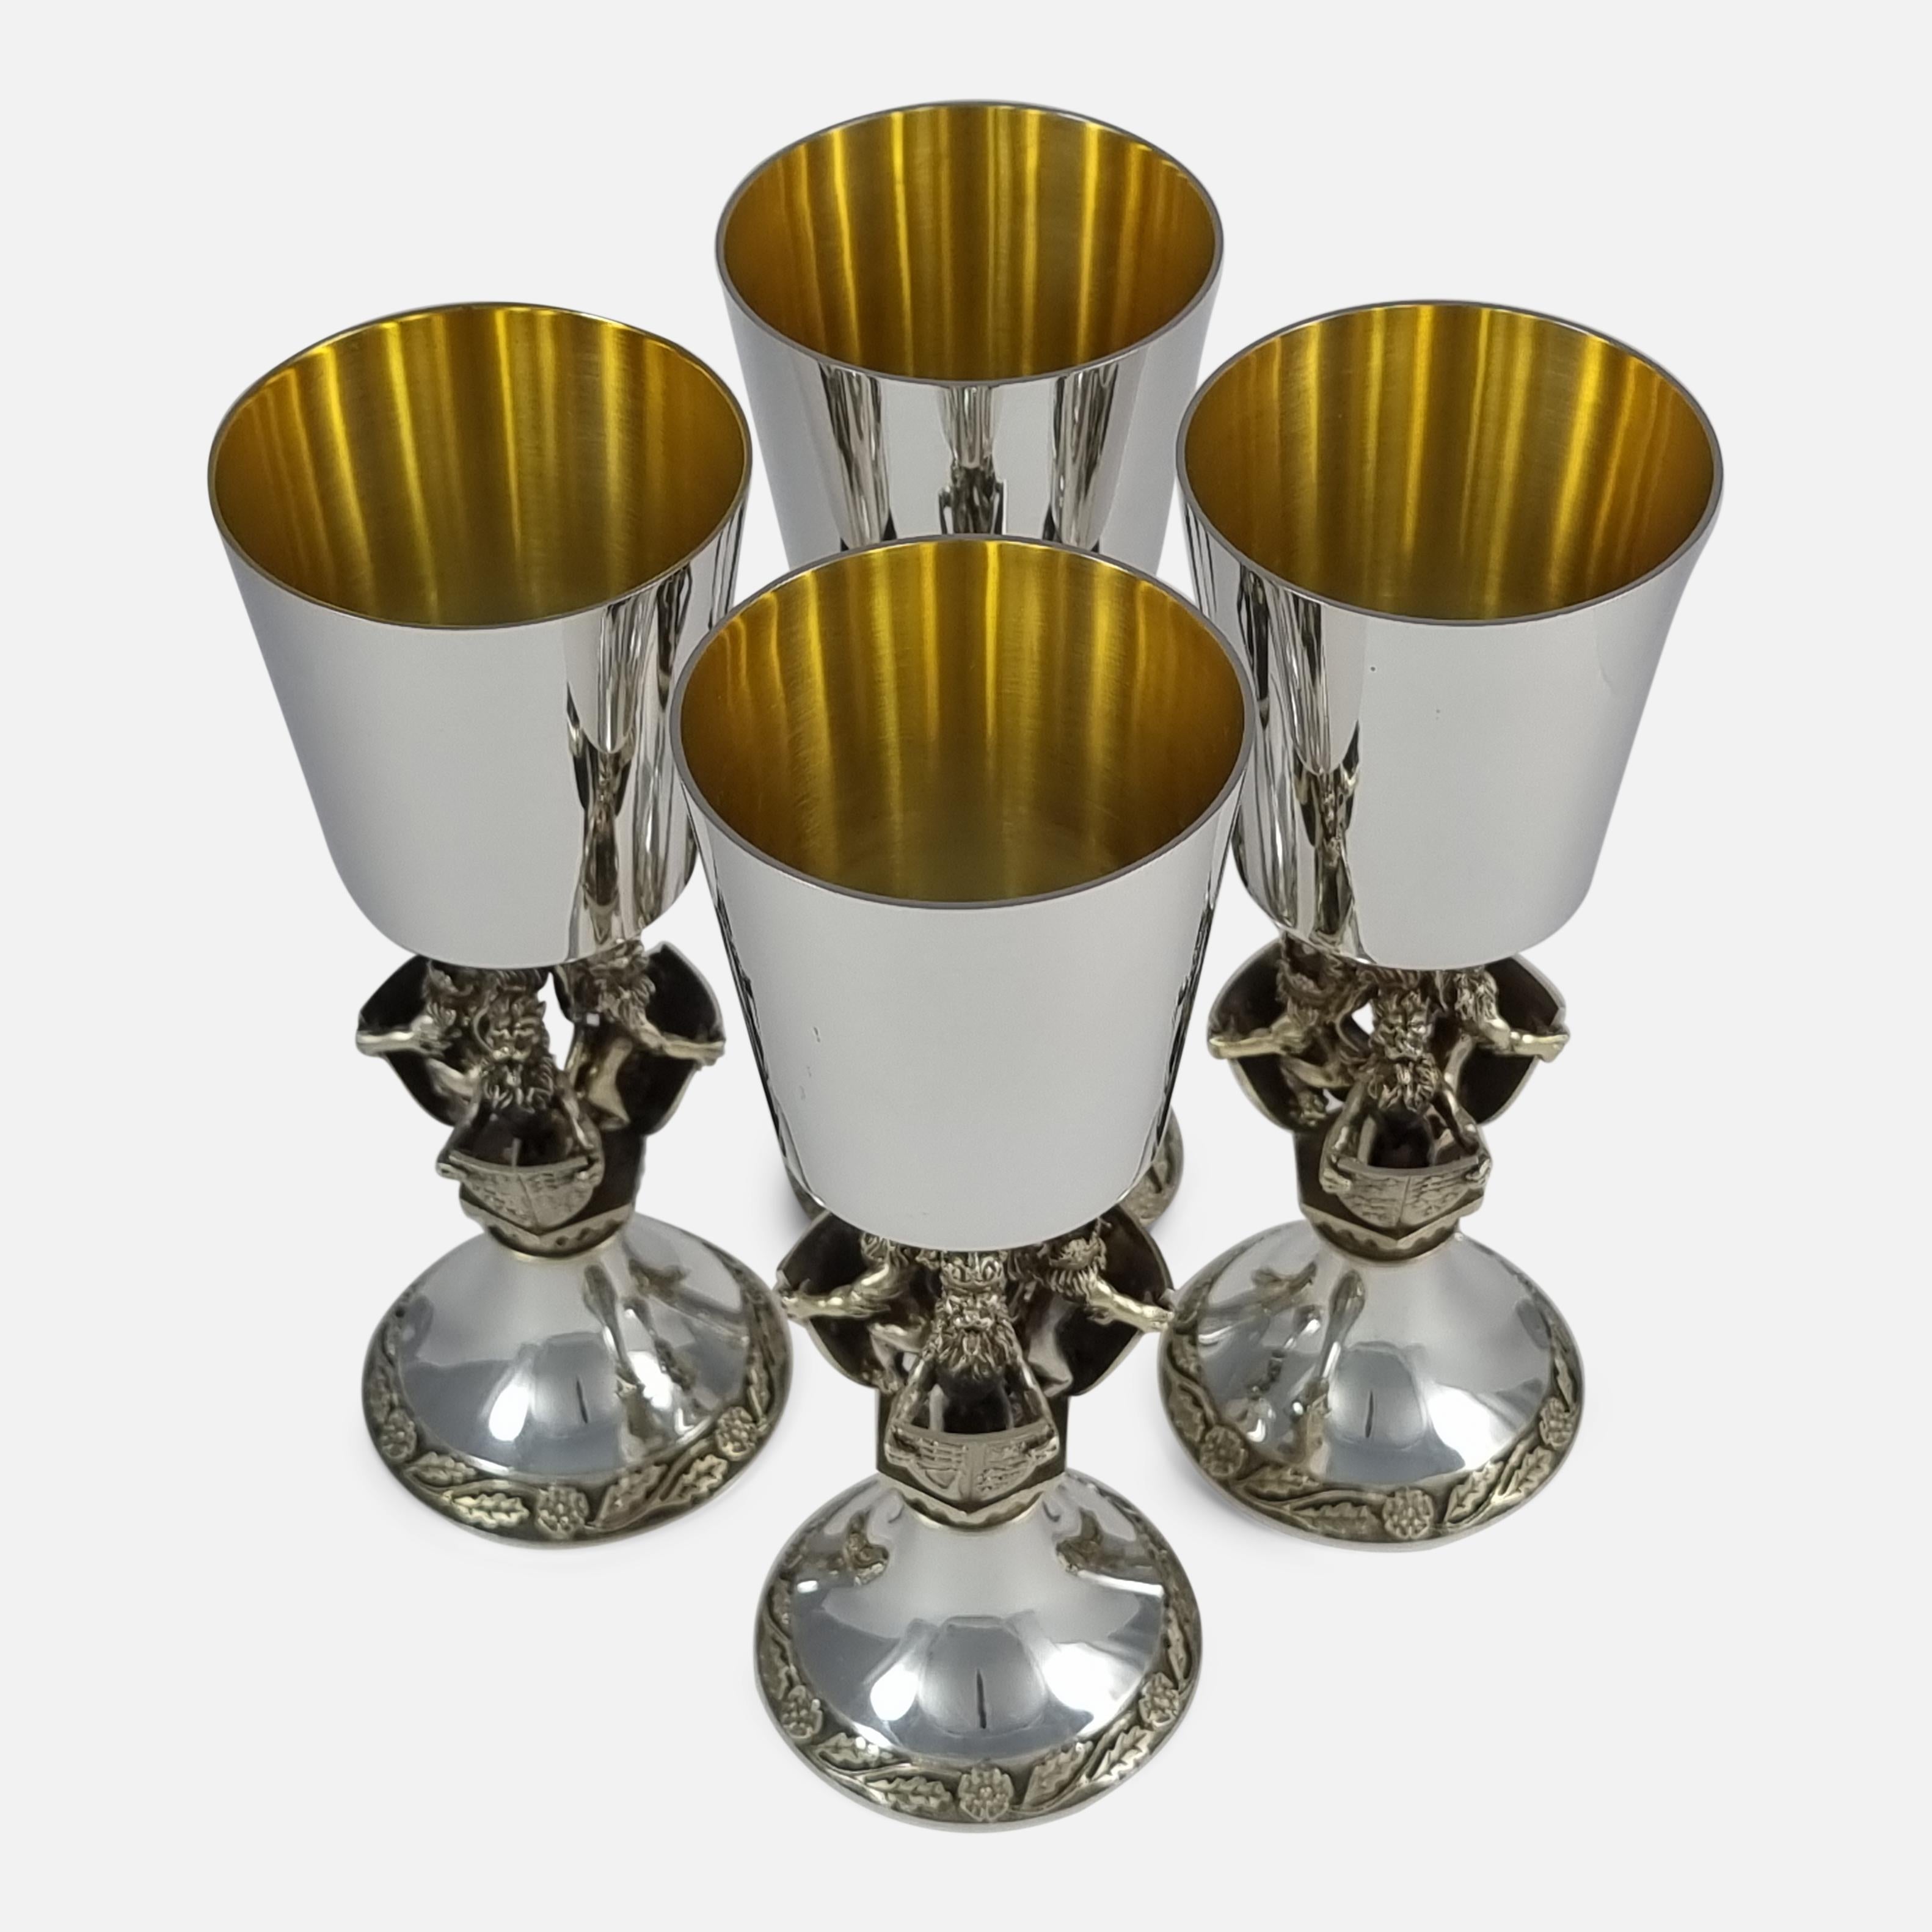 British Set of Four Aurum Silver Gilt 'College of Arms' Goblets, Hector Miller, 1984 For Sale